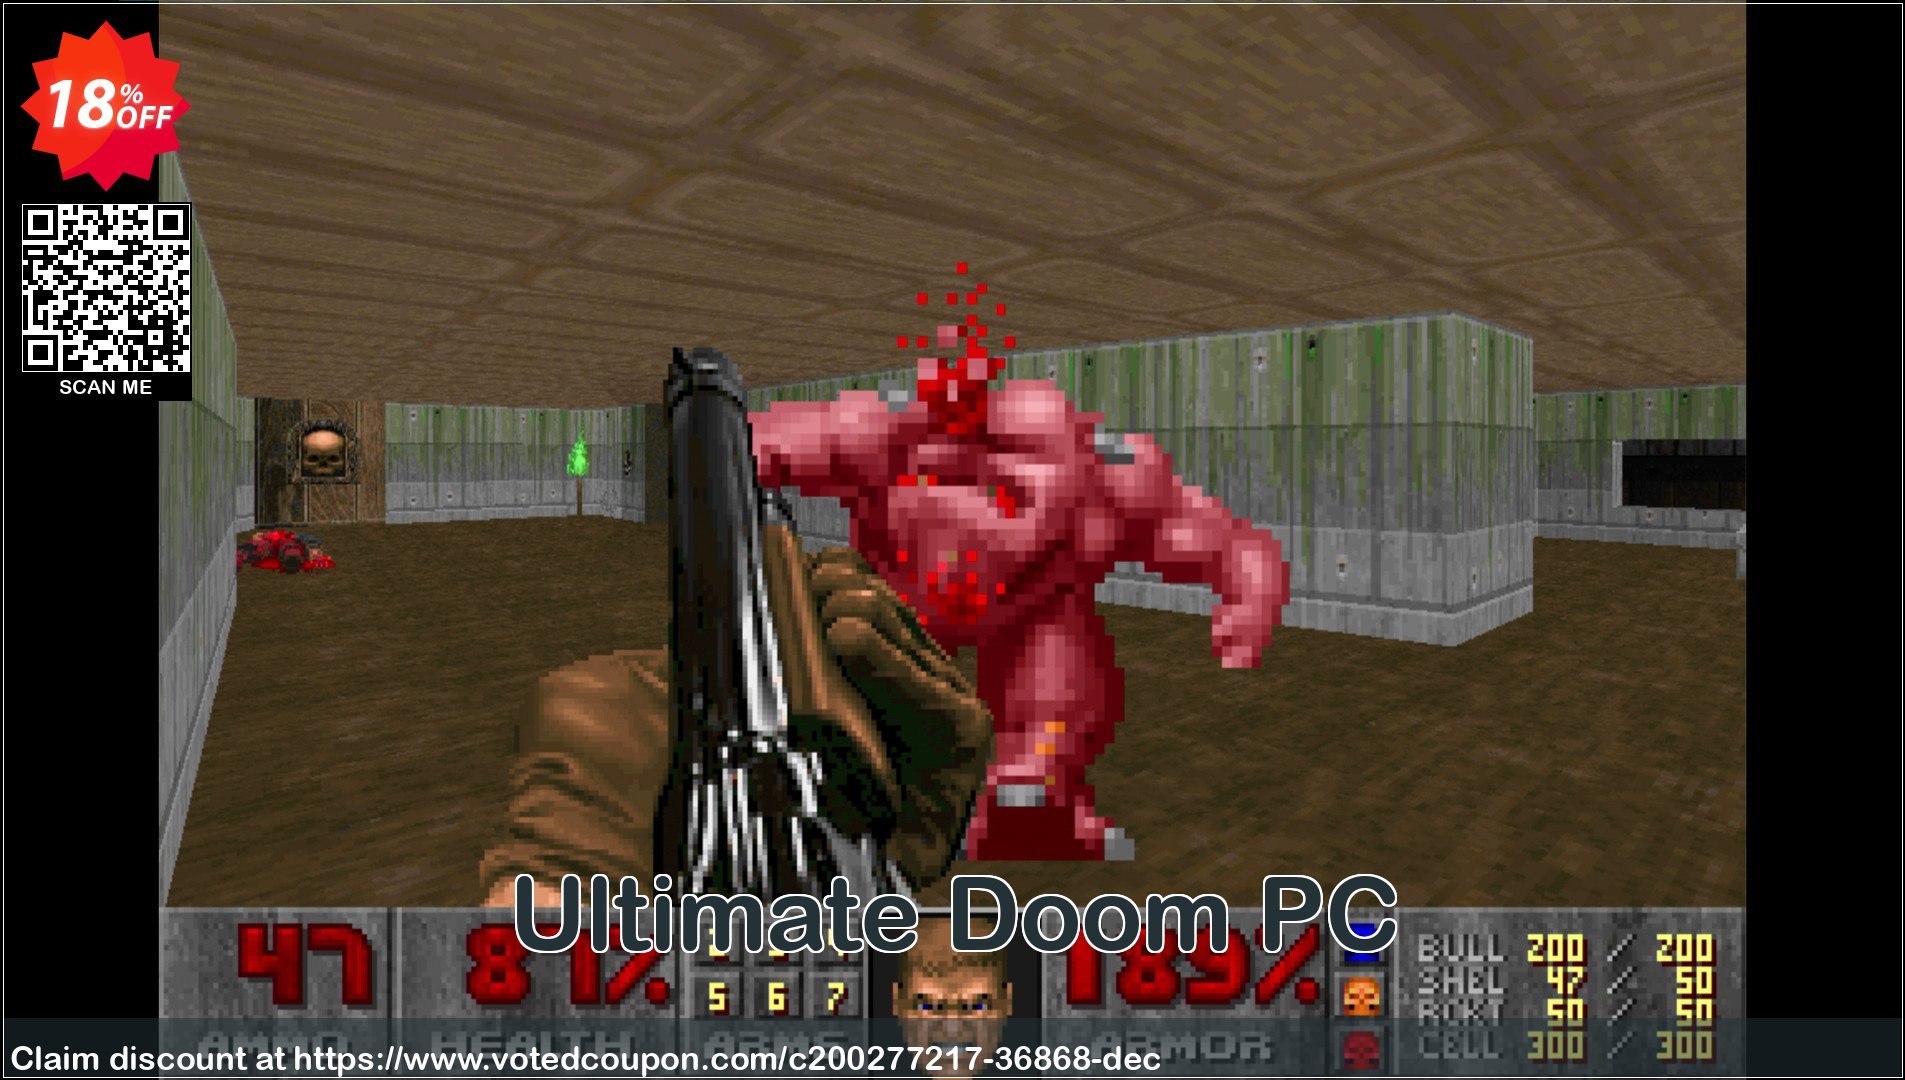 Ultimate Doom PC Coupon Code Apr 2024, 18% OFF - VotedCoupon